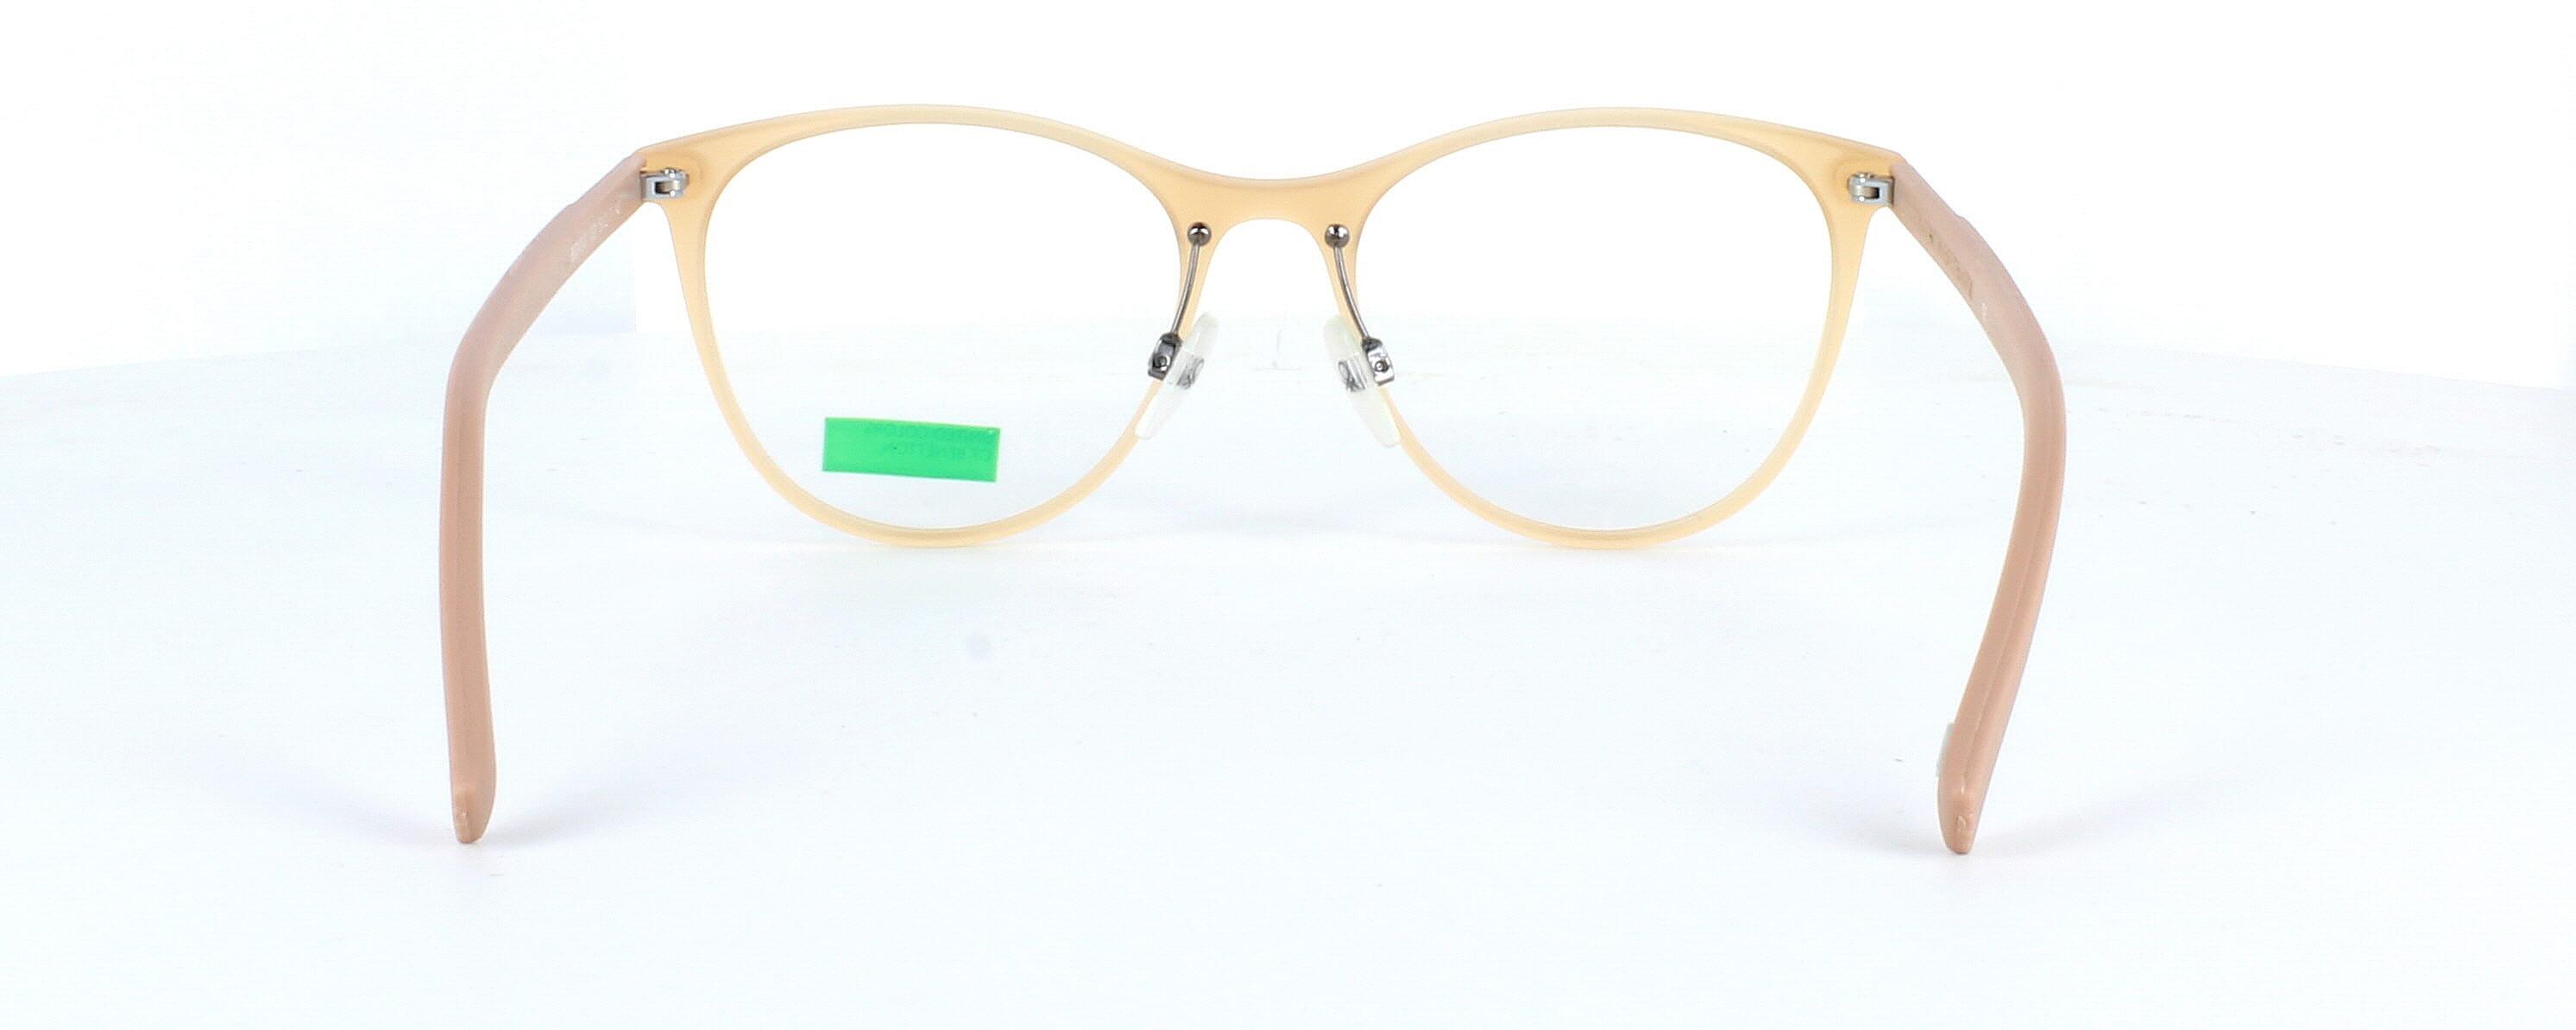 Benetton BEO1012 122 - Women's TR90 lightweight glasses frame in crystal beige - image view 4